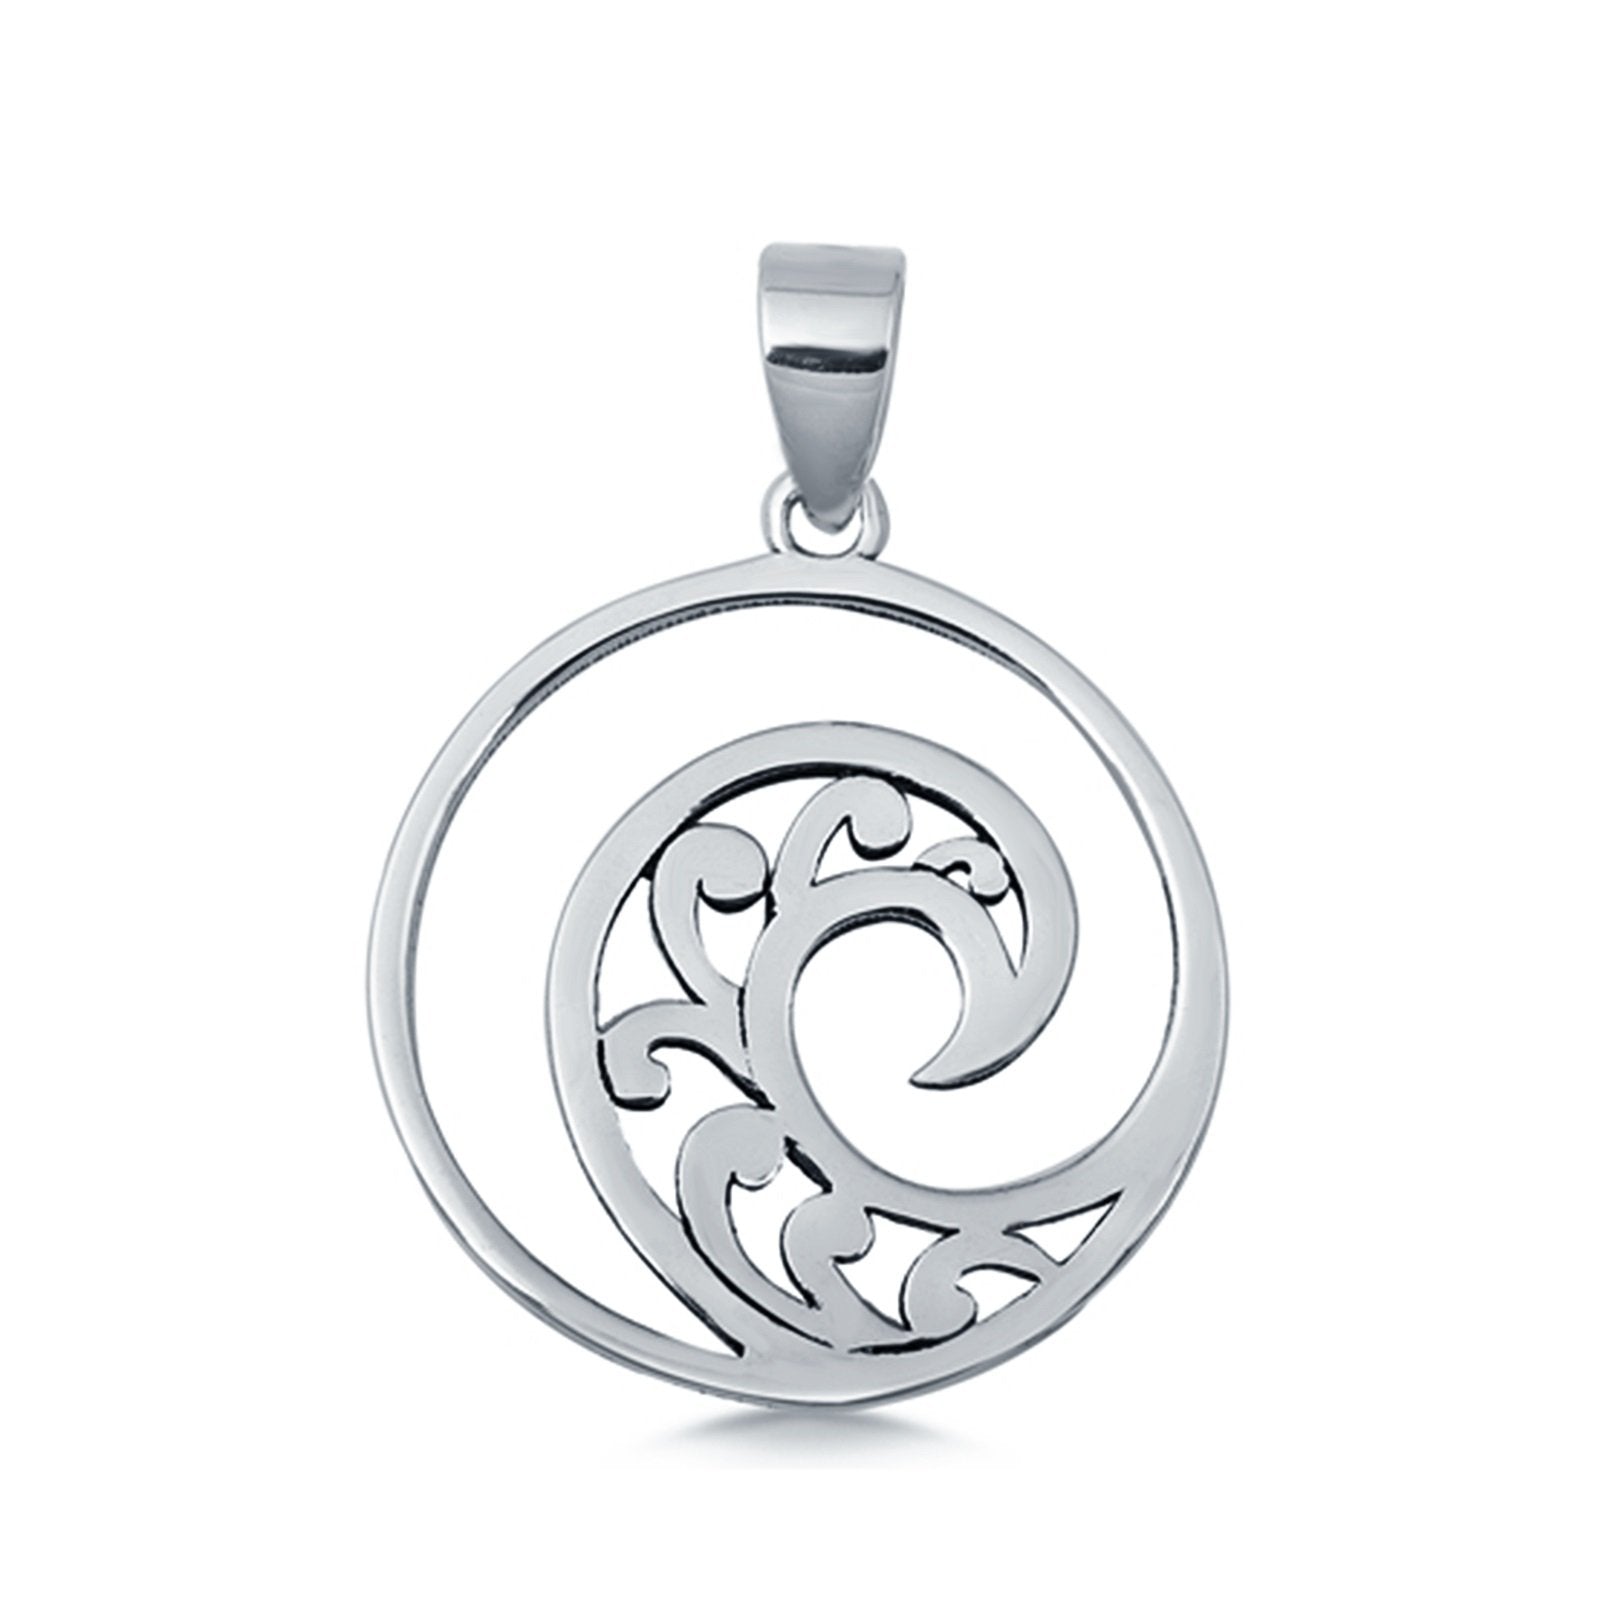 Fashion Jewelry Wave Pendant Charm 925 Sterling Silver (20mm)